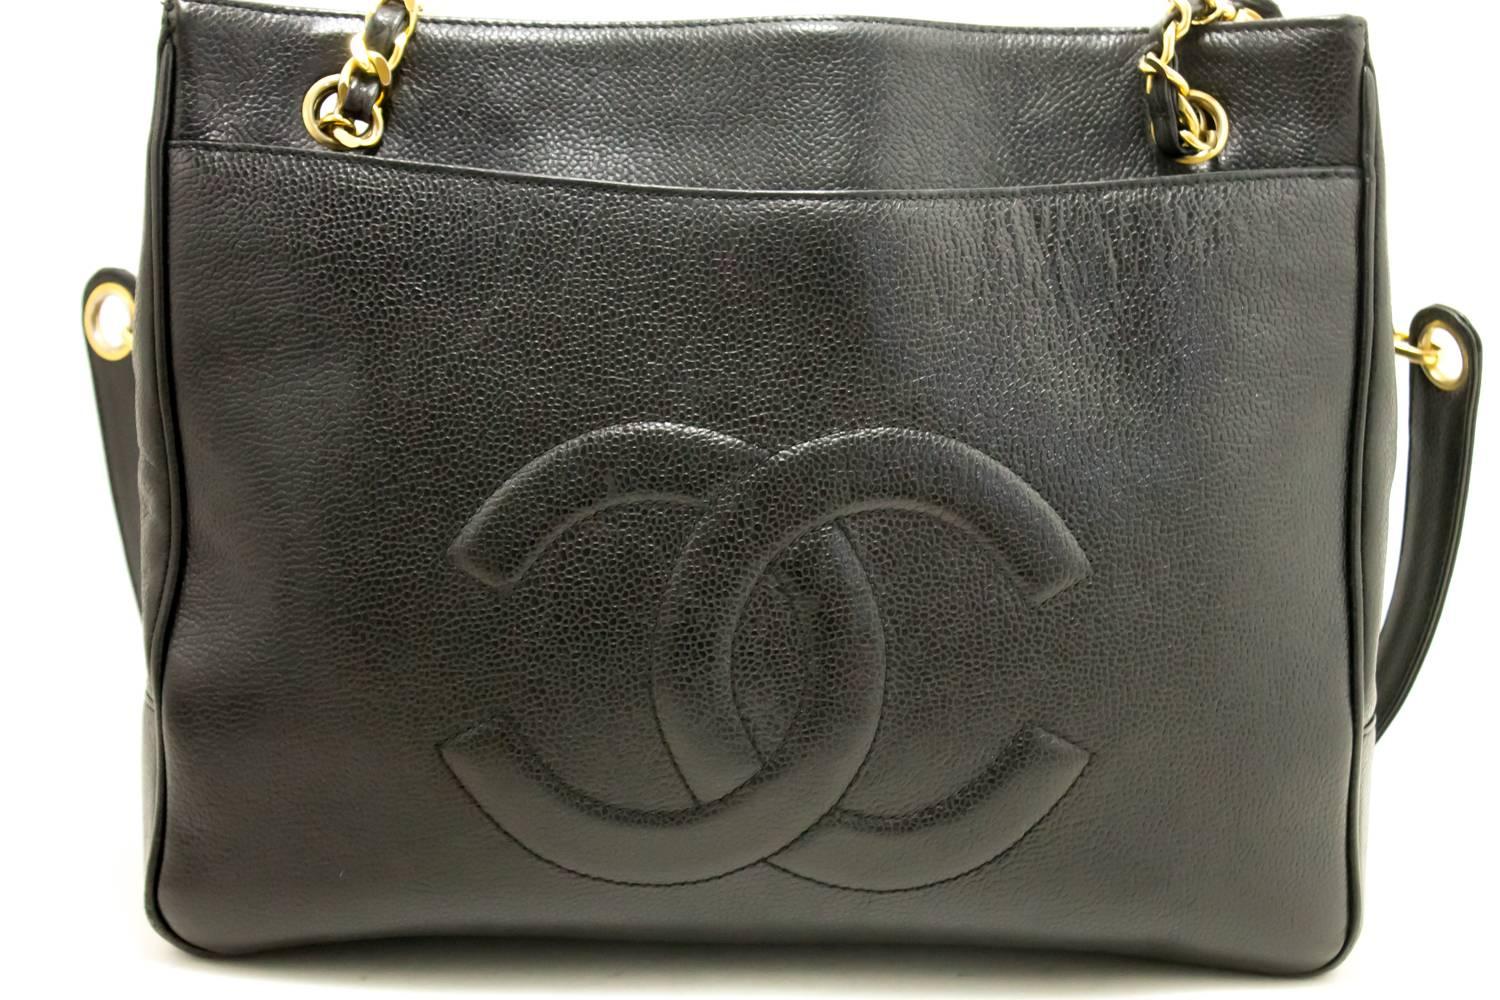 An authentic CHANEL Caviar Large Chain Shoulder Bag Black CC Leather Gold The outside material is Caviar leather.
Conditions & Ratings
Outside material: Caviar leather
Color: Black
Closure: Snap
Hardware and chain: Gold-tone
Serial sticker: